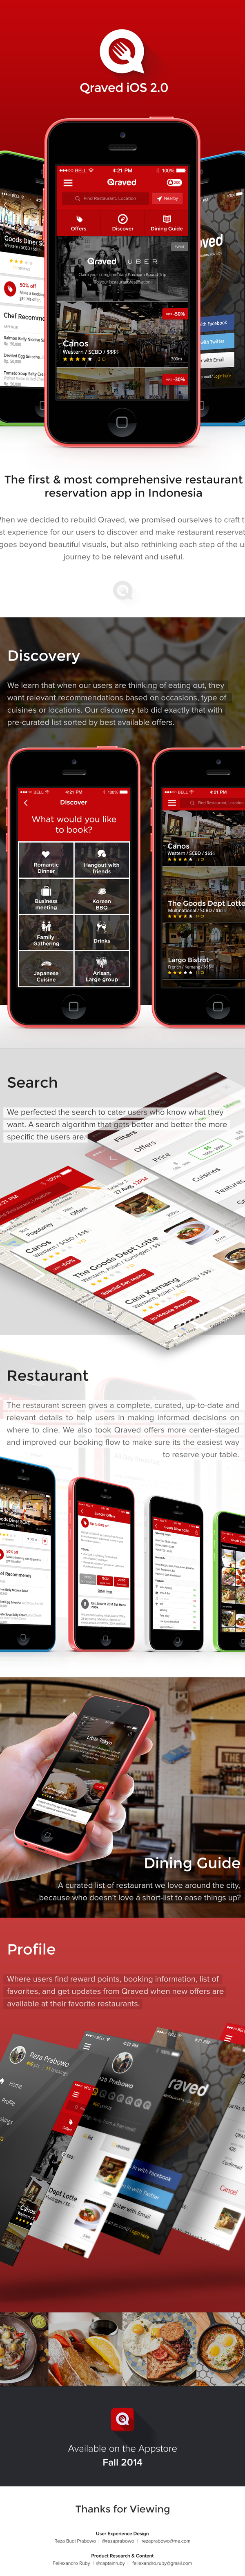 Qraved reservation ios Booking restaurant Food  dining indonesia jakarta